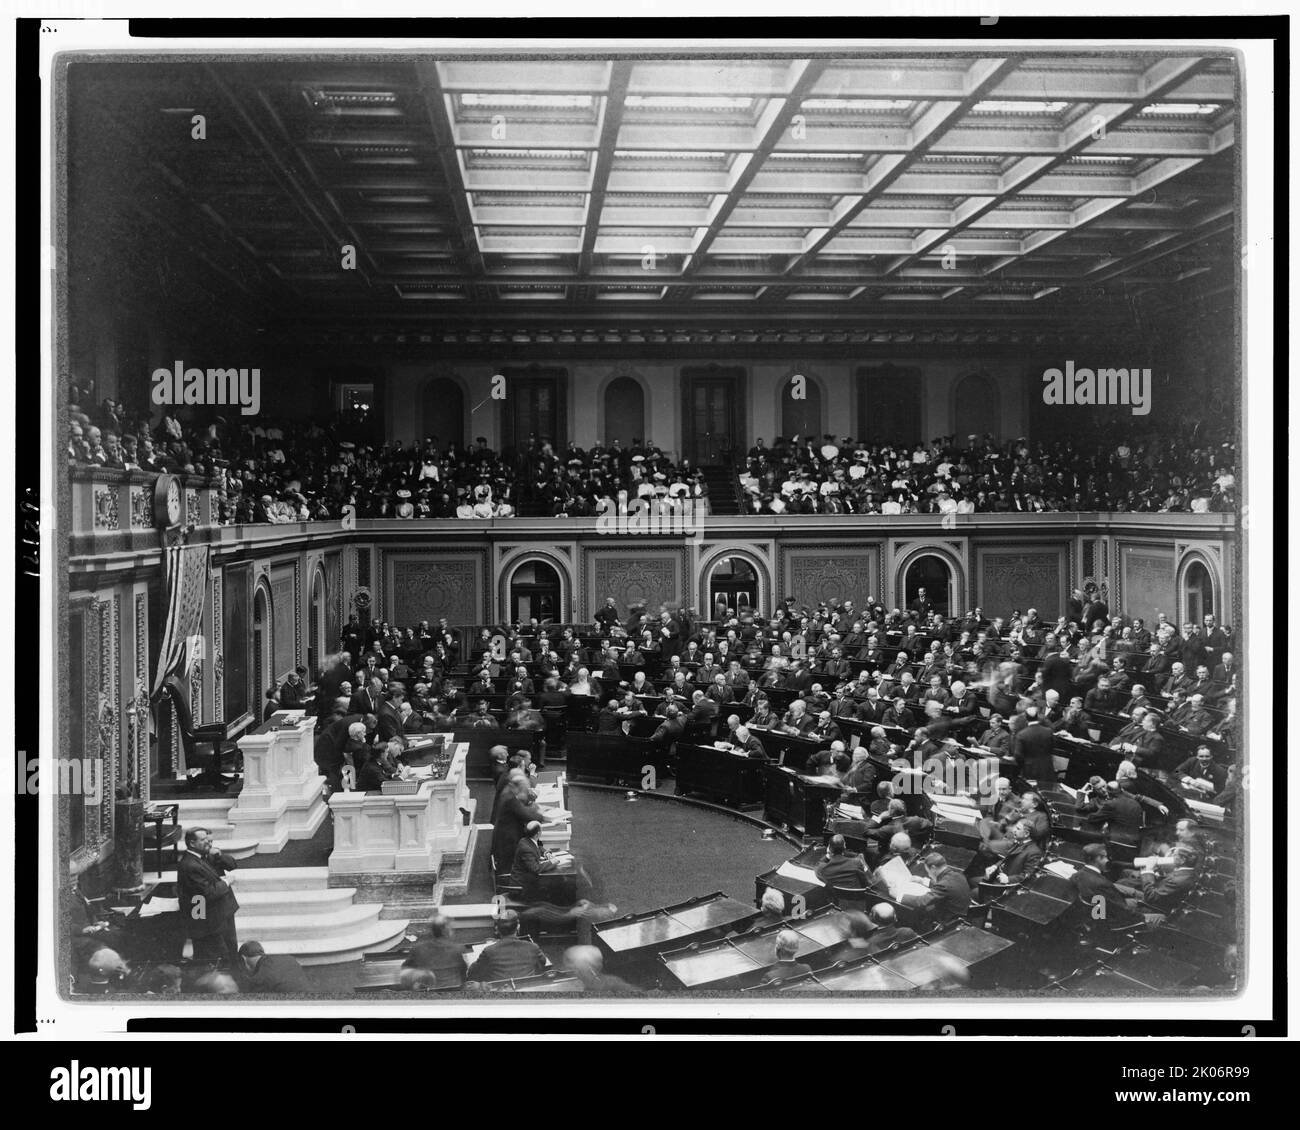 The House called to order--Opening of 59th Congress, 1906. Opening ceremonies of the U.S. 59th Congress, 2nd session, 1906, with Speaker Joseph Cannon presiding. Stock Photo